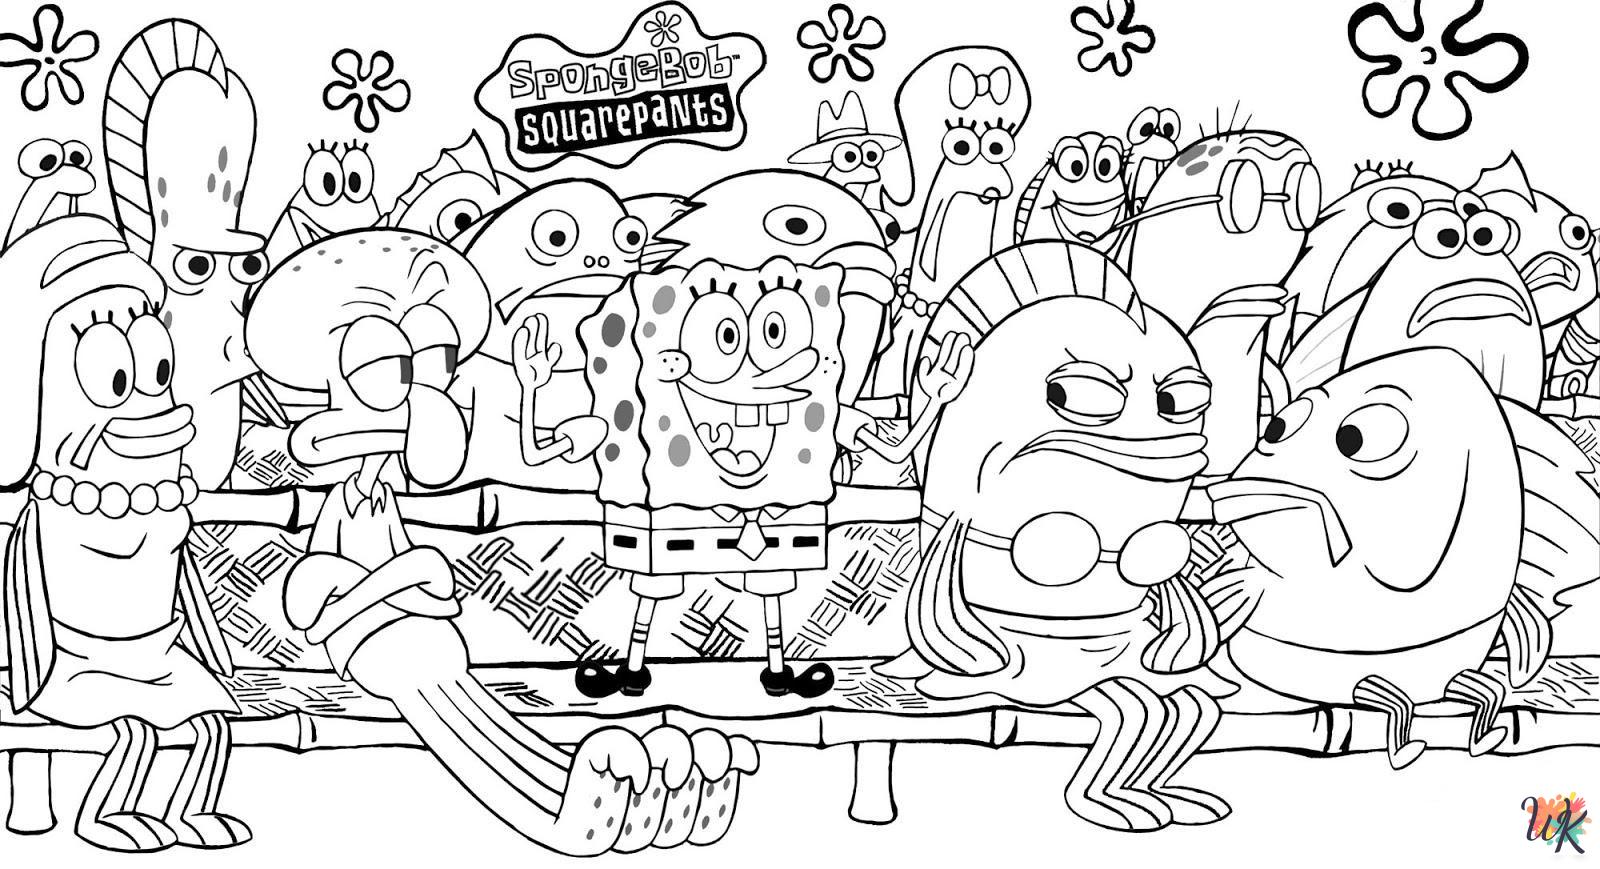 Spongebob free coloring pages